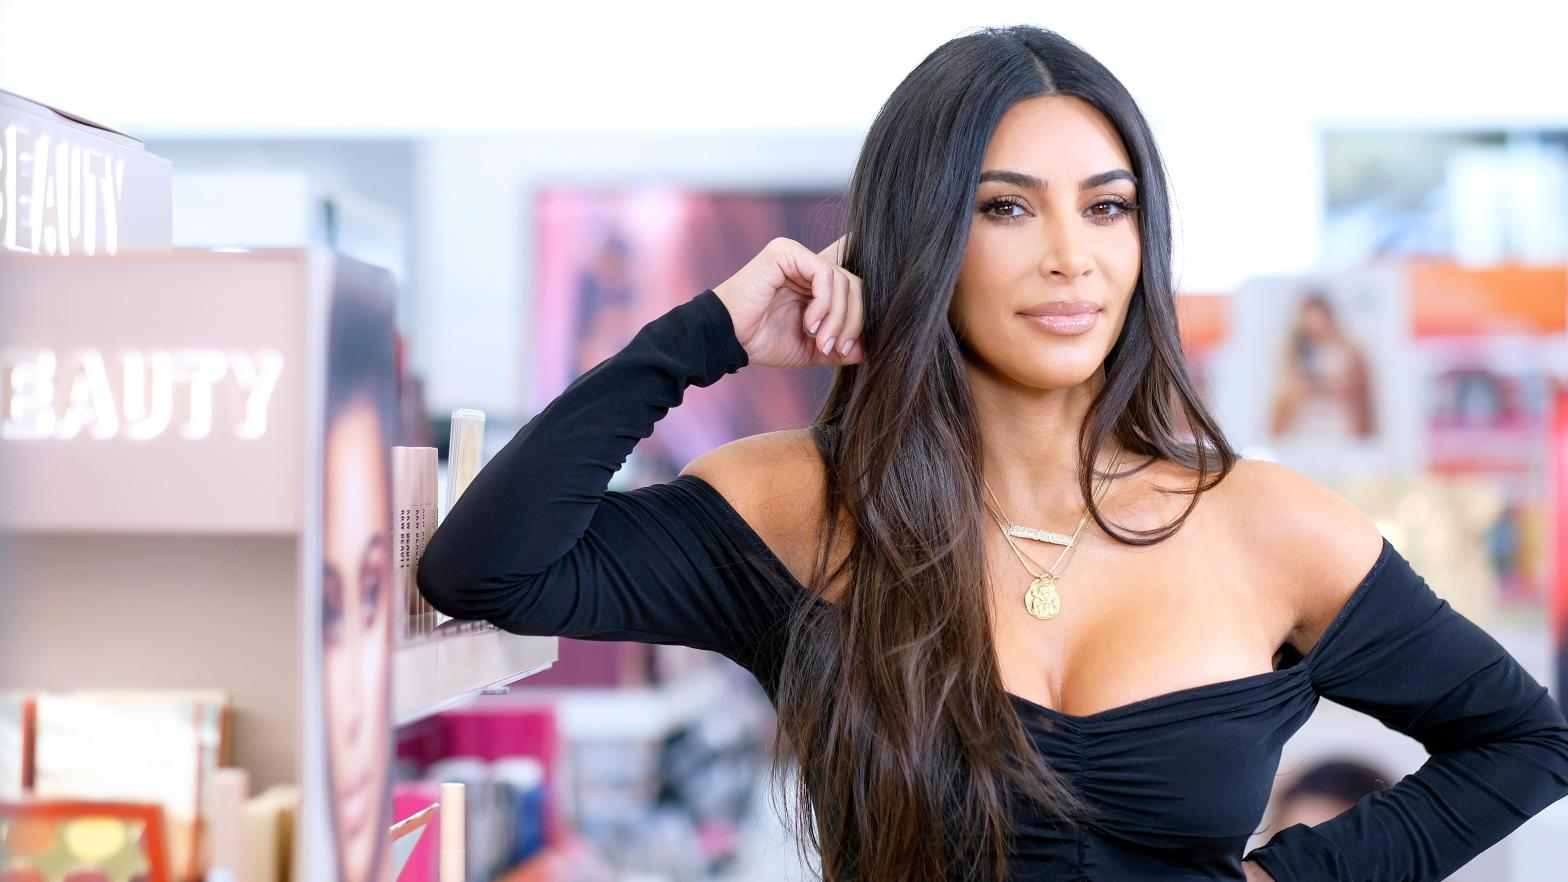 Kardashian will be partnering with Beyond Meat on a newsletter. (Photo: Dimitrios Kambouris, Getty Images)